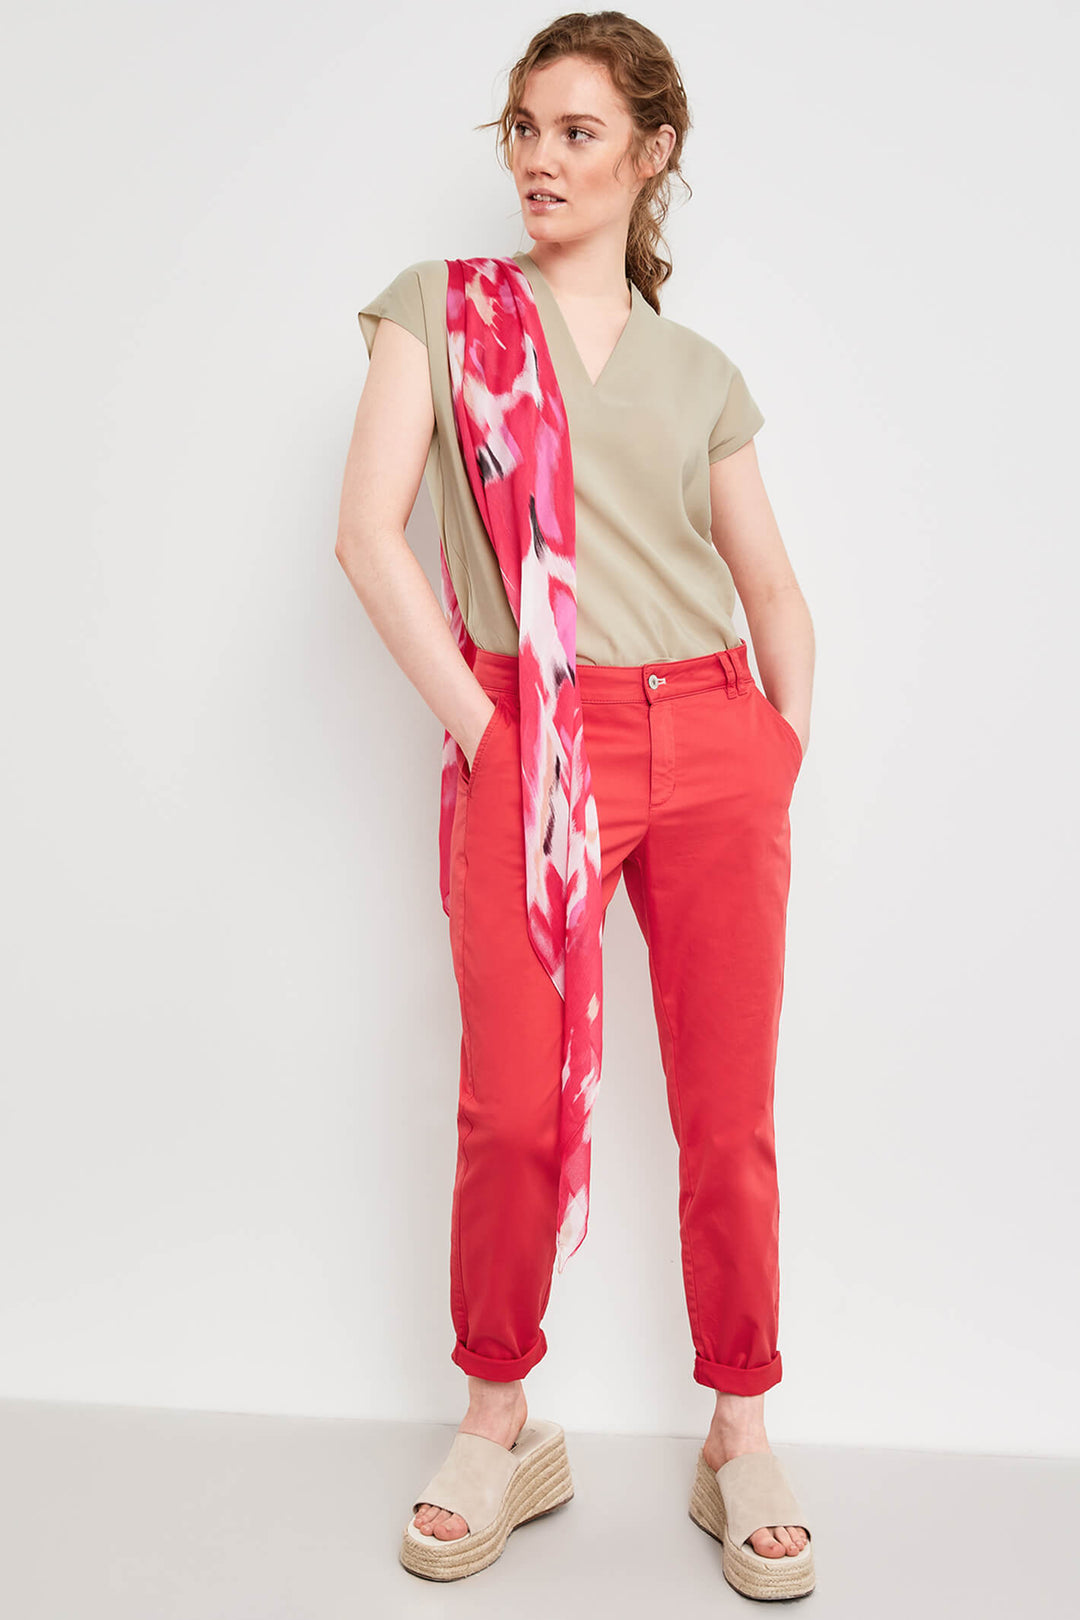 Taifun 300304 Hot Pink Abstract Floral Scarf - Experience Boutique